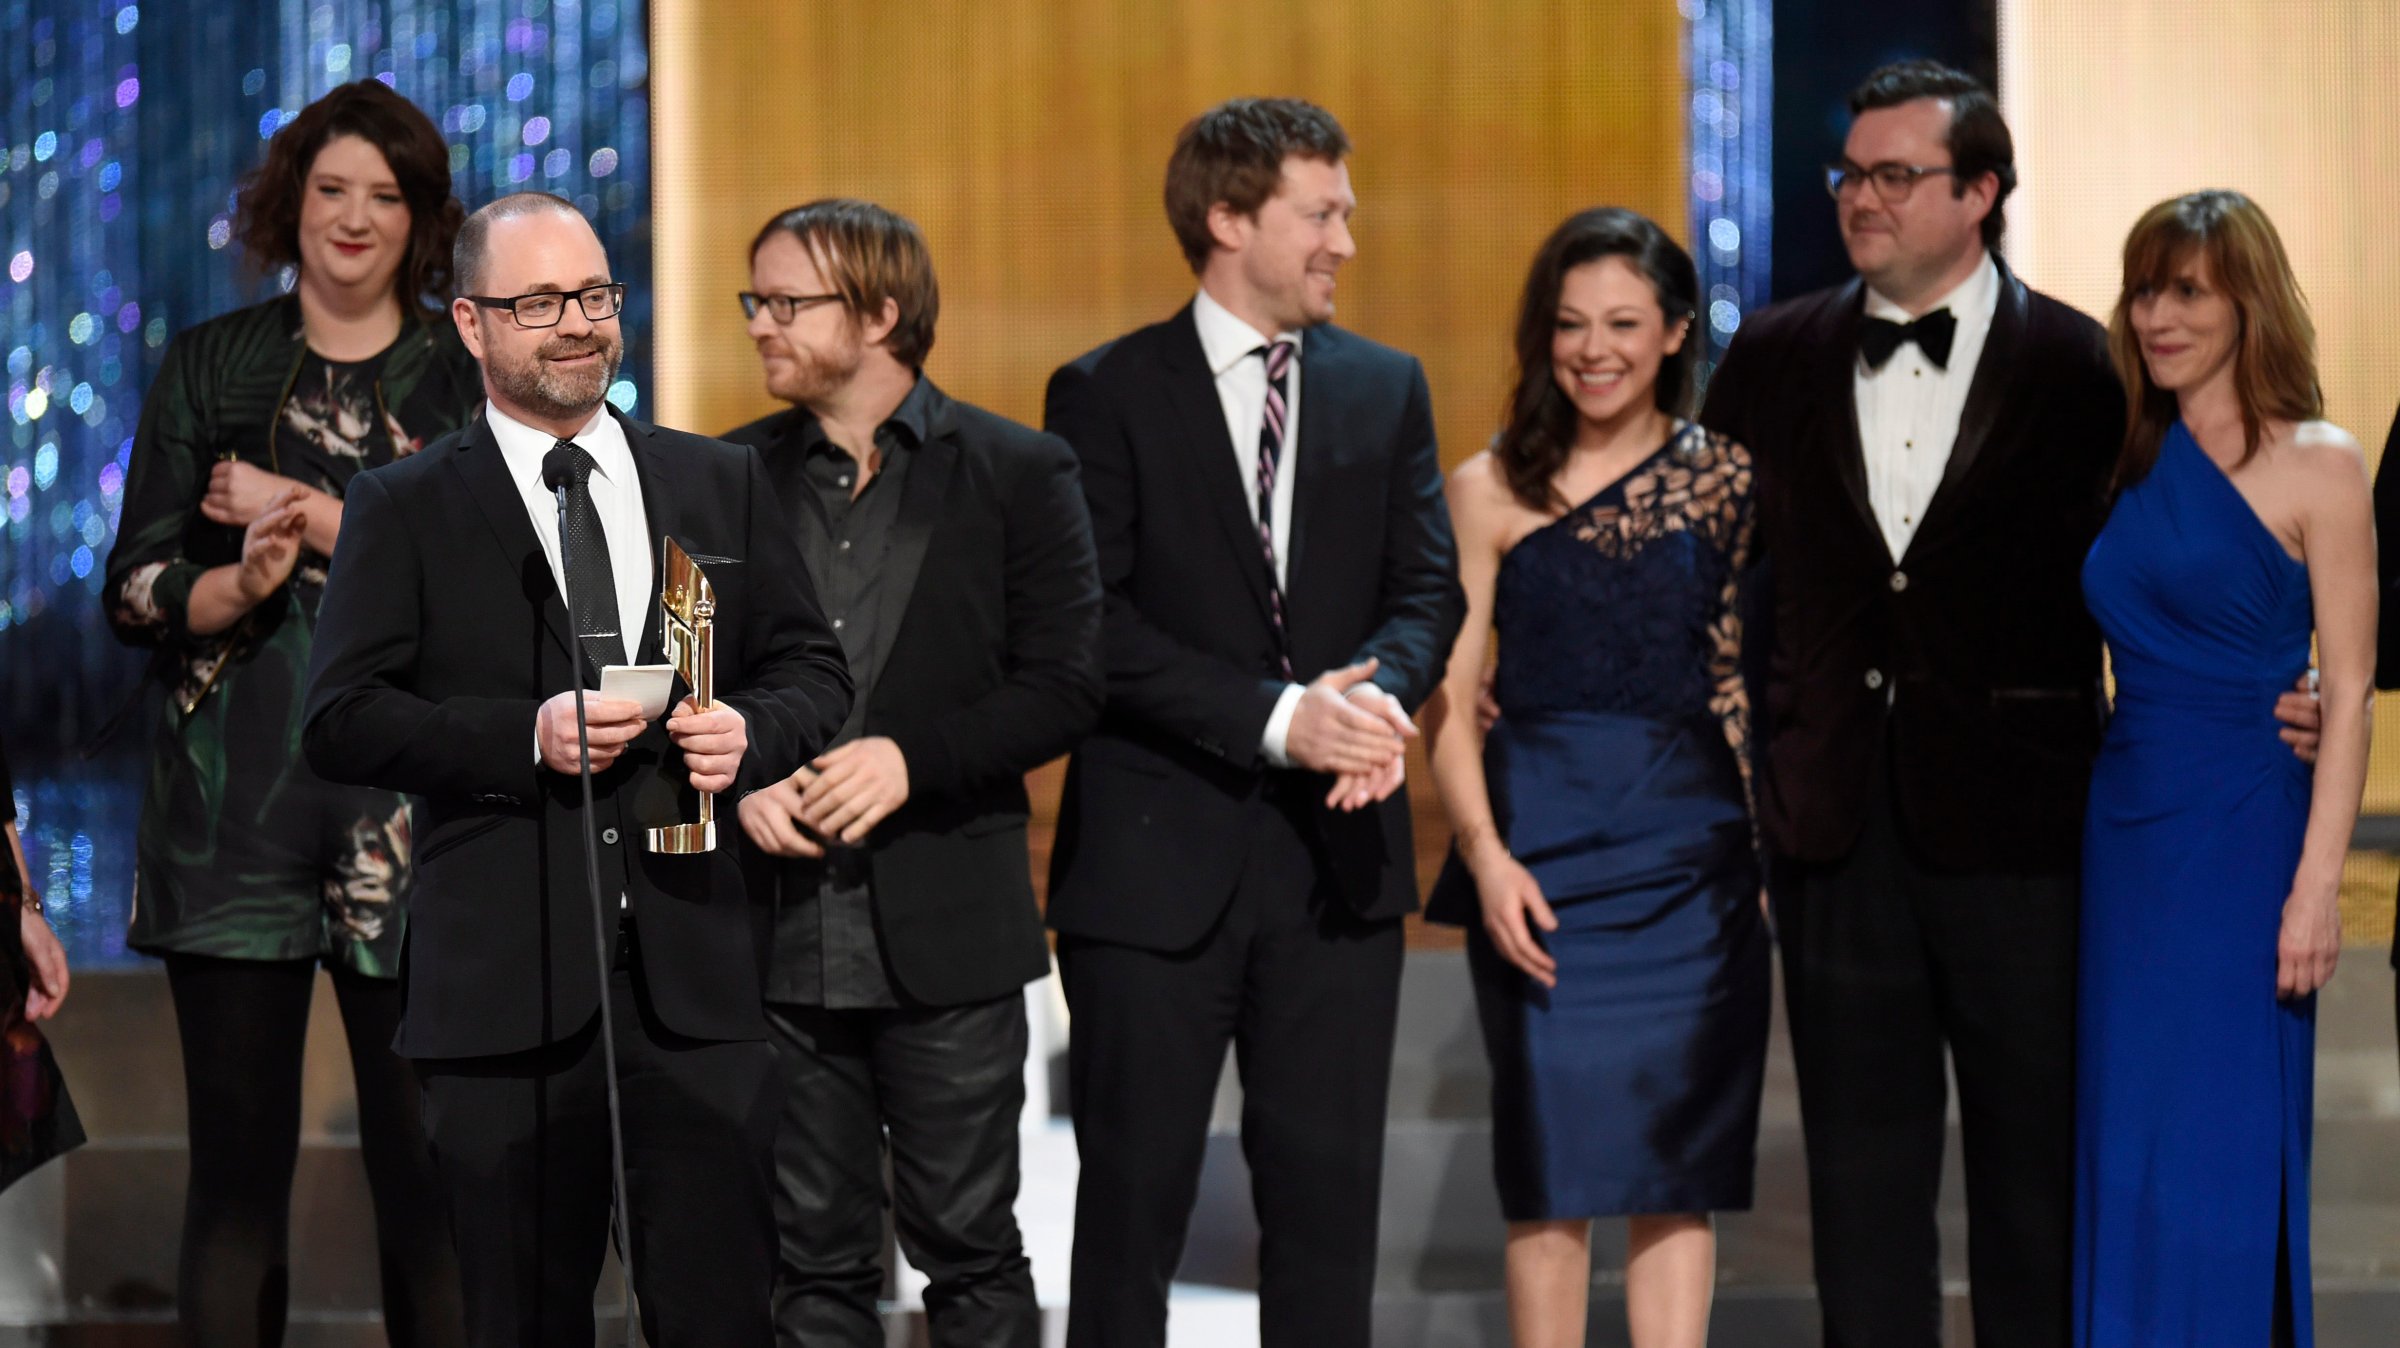 The best drama series for "Orphan Black" is awarded at the Canadian Screen Awards in Toronto